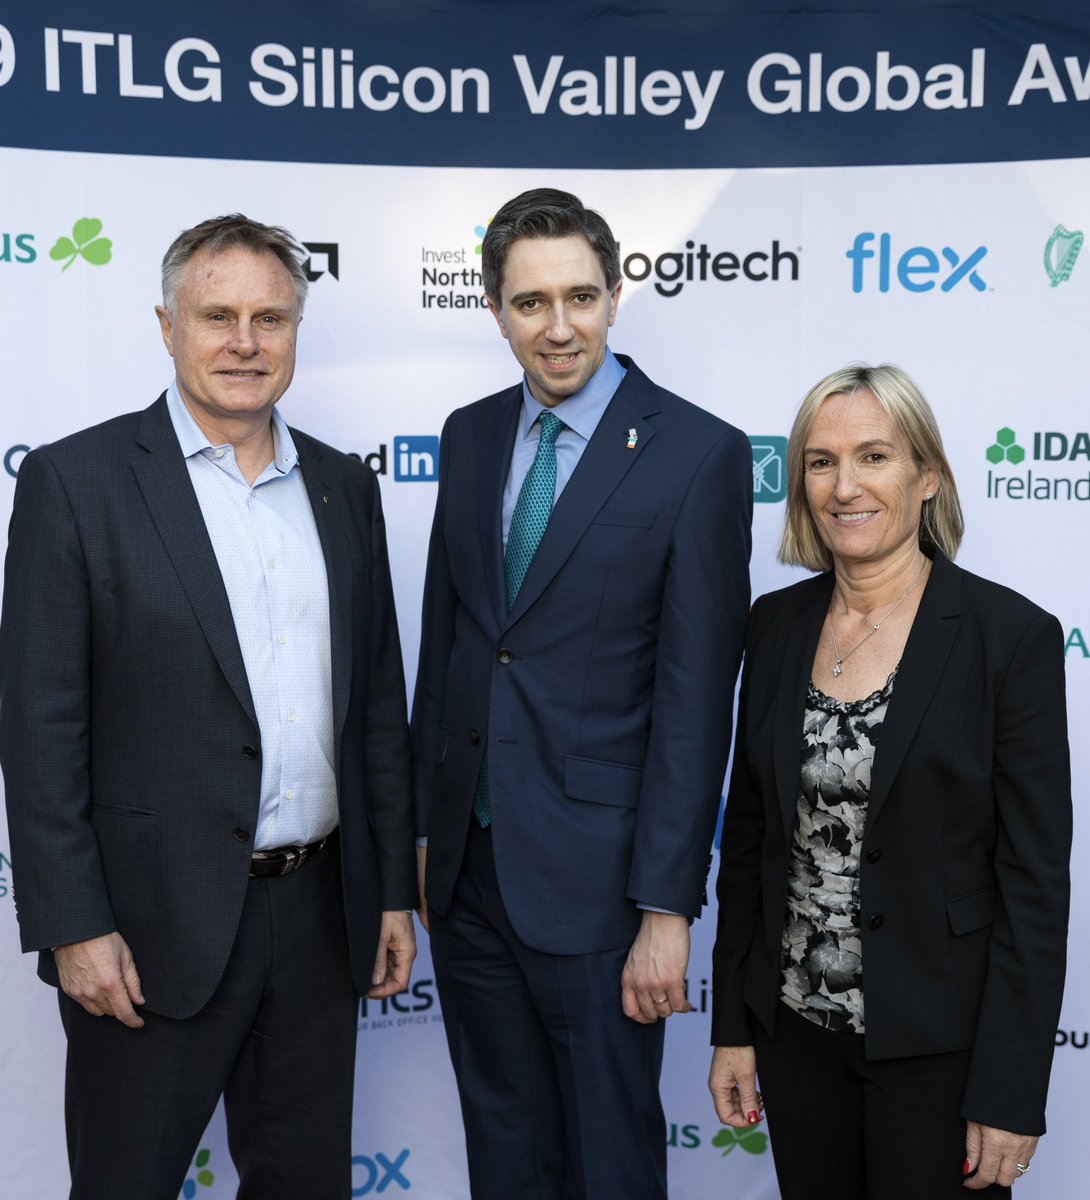 Congrats to our new Taoiseach @SimonHarrisTD & looking forward to seeing him out in #SiliconValley again soon. @IrelandEmbUSA @dfatirl @MichealMartinTD @itlgorg @HelenDHartnett @THRIVEAgriFood @hartnettcentre